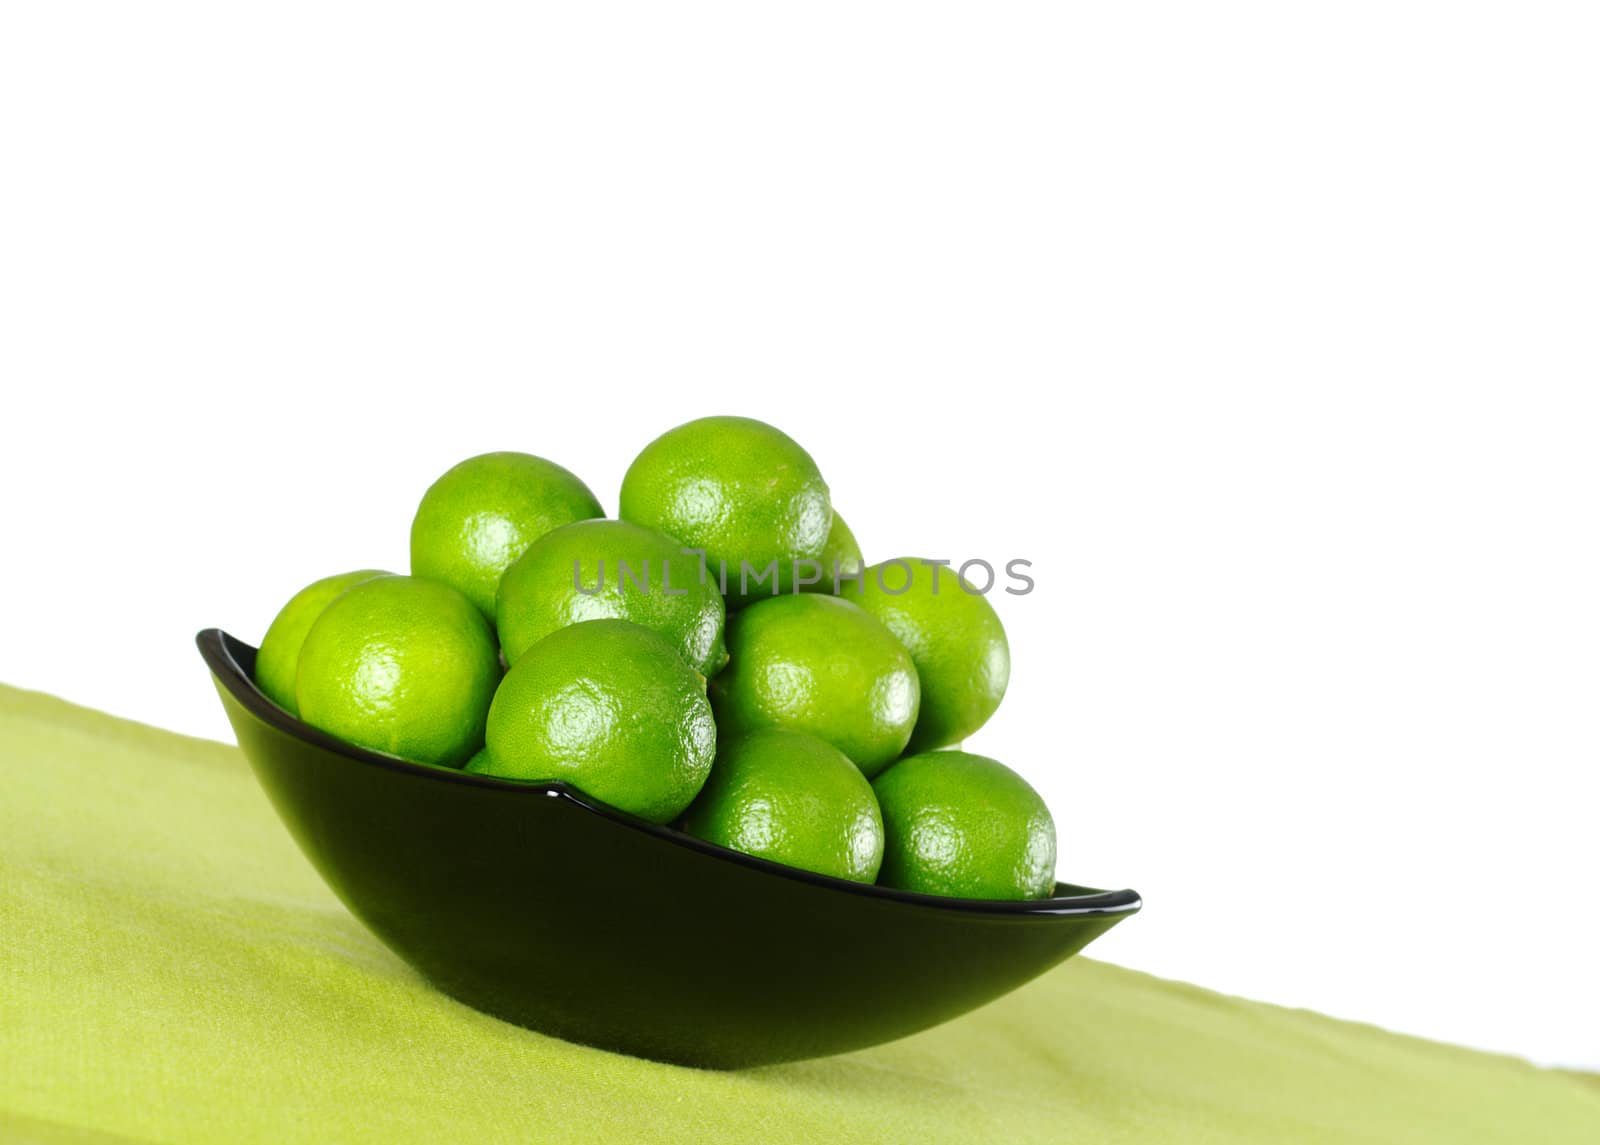 Green limes in black bowl on a green table mat with white background (Selective Focus, Focus on the lime in the front)